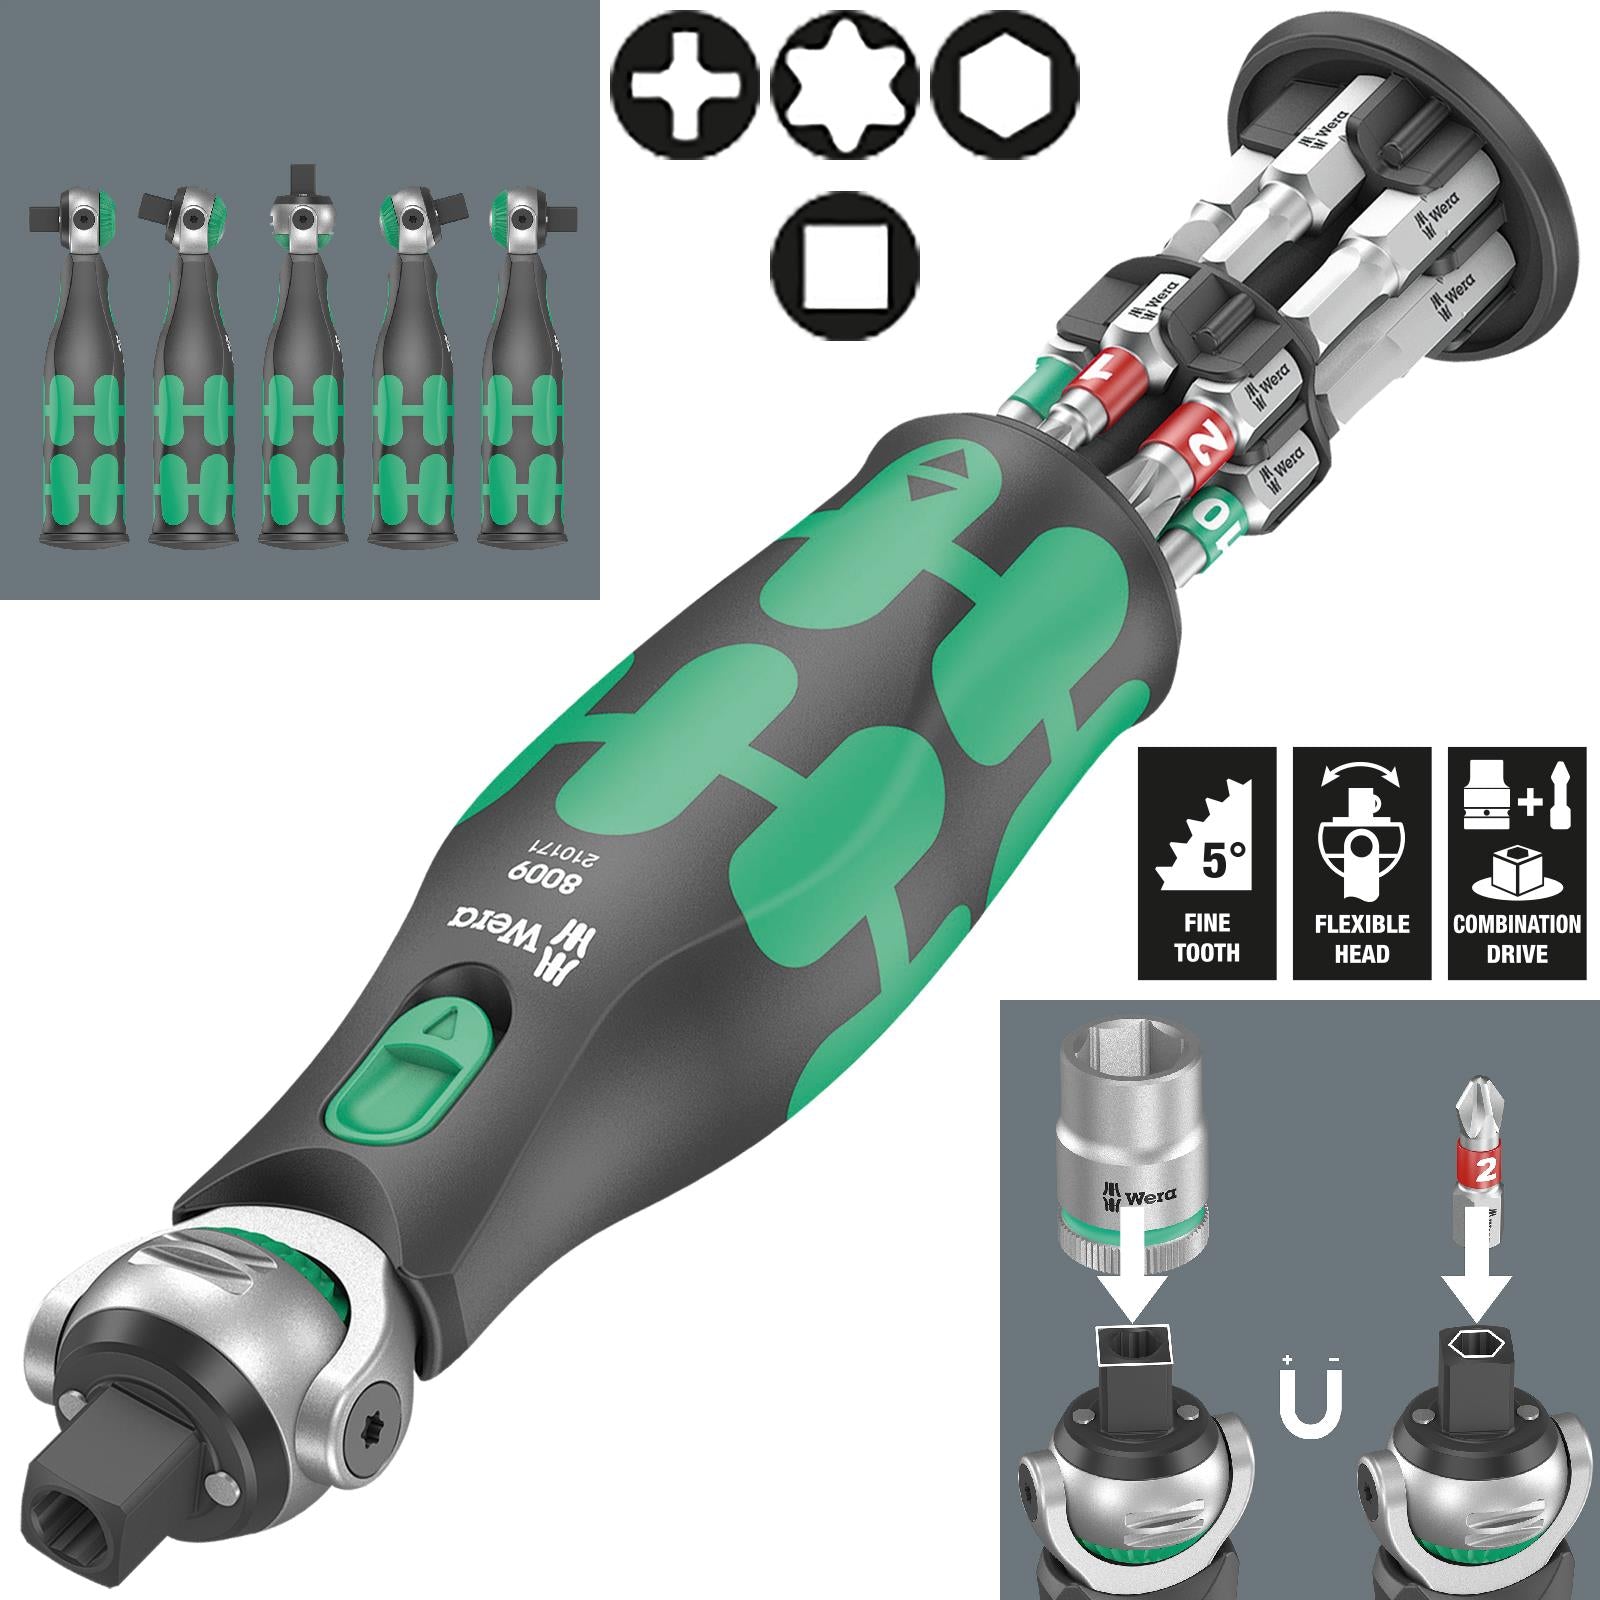 Wera Compact Screwdriver Socket Wrench Zyklop Pocket Imperial Set 1 13 Pieces 8009 3/8" Drive 1/4" Hex